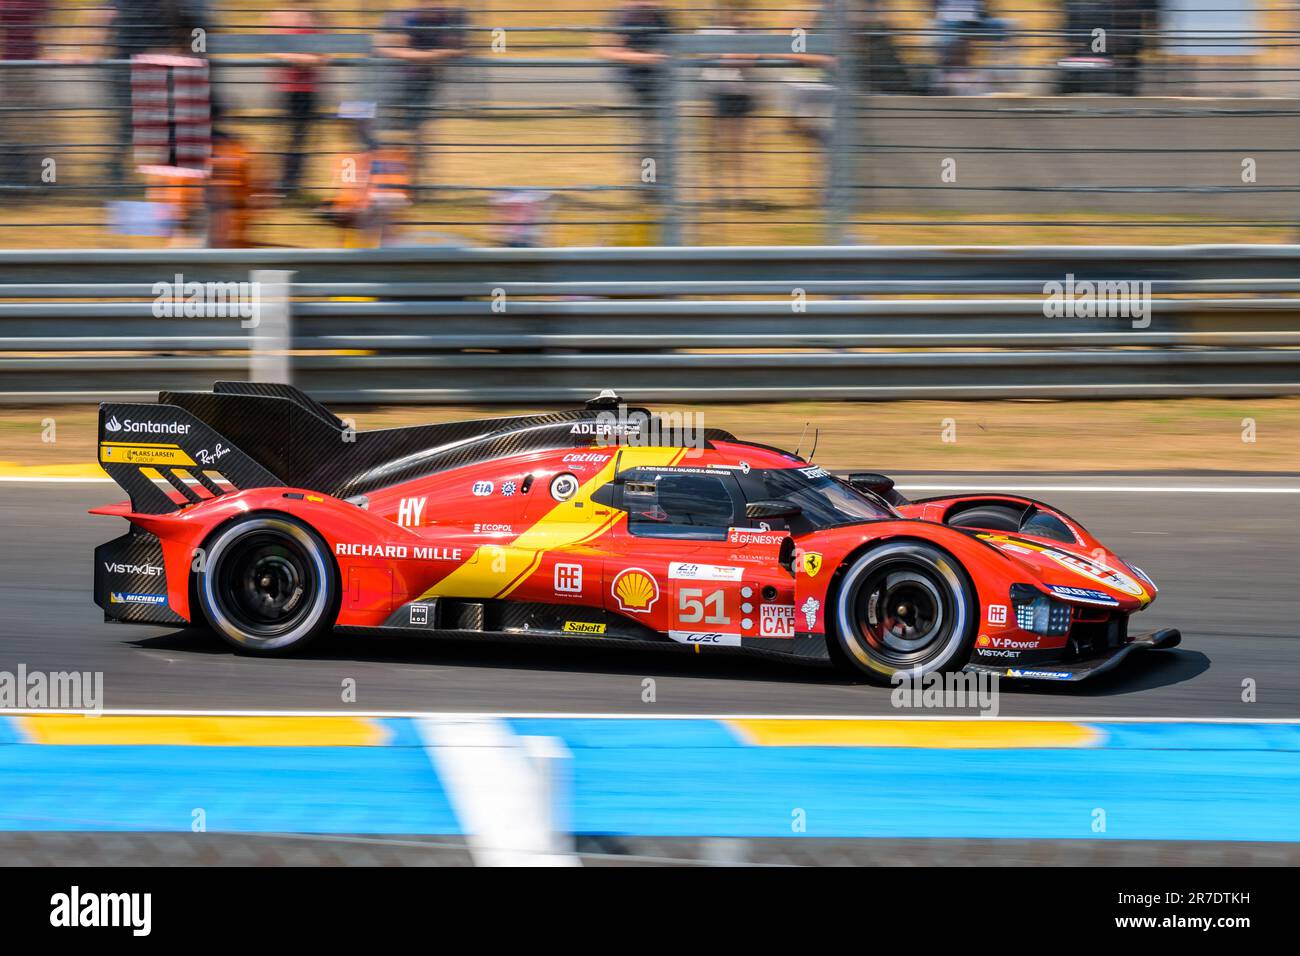 The Ferrari 499P Hypercar race car No. 51, from the AF Corse team, on the Circuit de la Sarthe race track during the 24 hours of Le Mans. Stock Photo